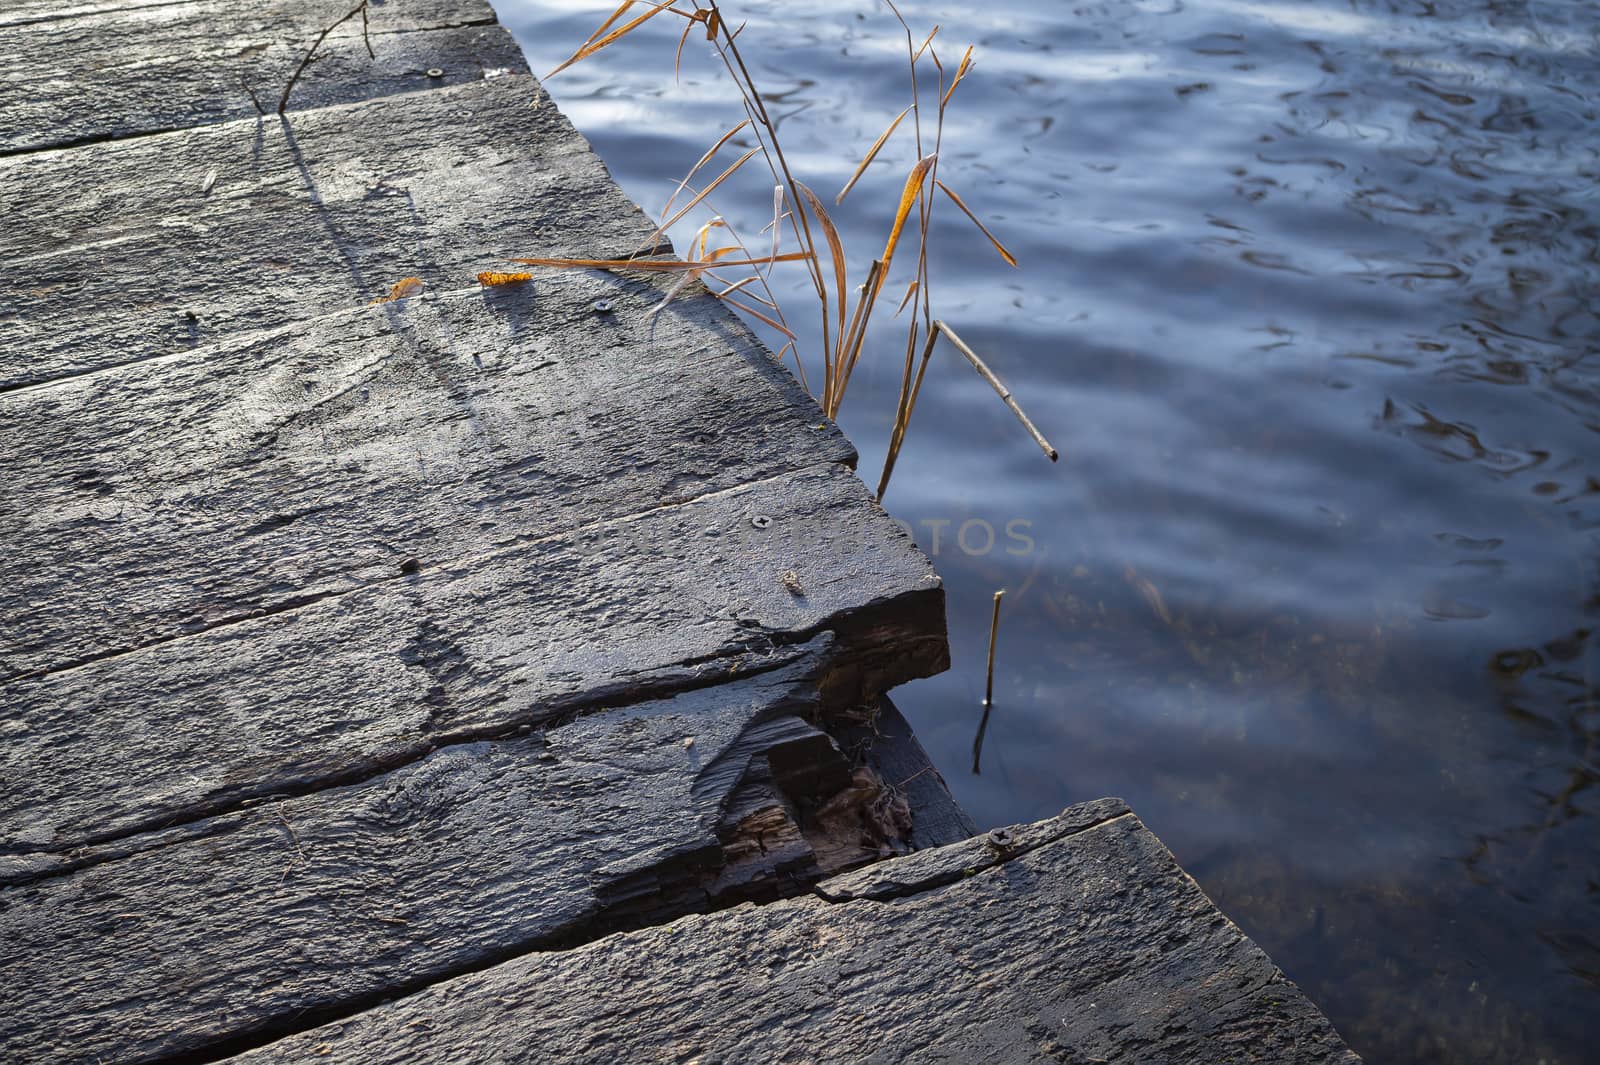 The texture of the boards of the old rustic wooden jetty on a tranquil lake with reeds. Abstract background and texture for design ideas.